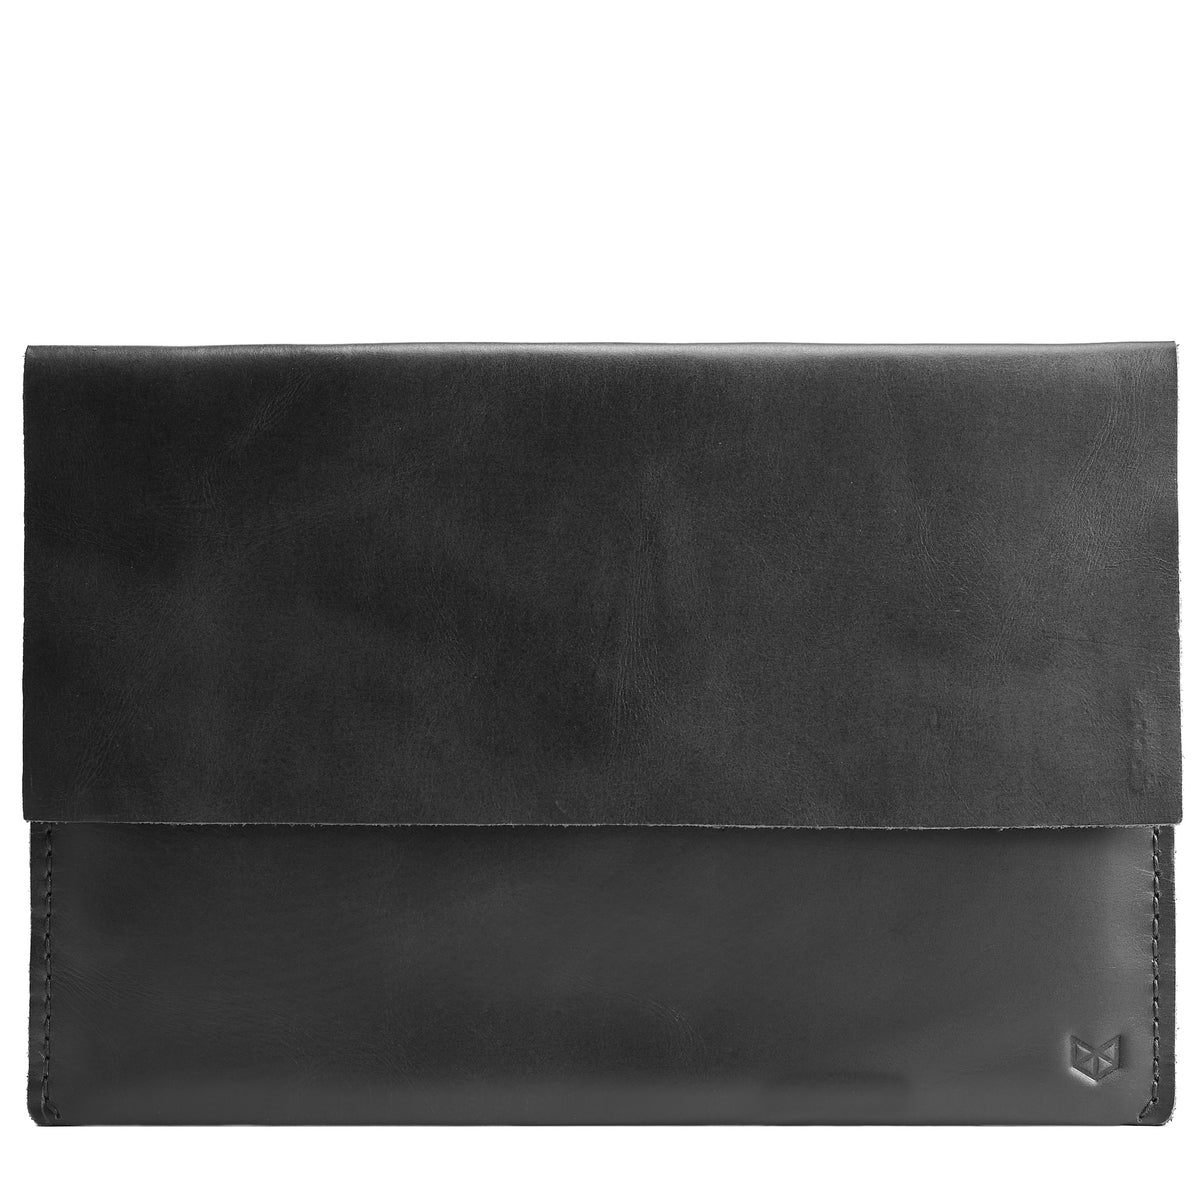 Cover. Black Leather MacBook Case. MacBook Sleeve by Capra Leather